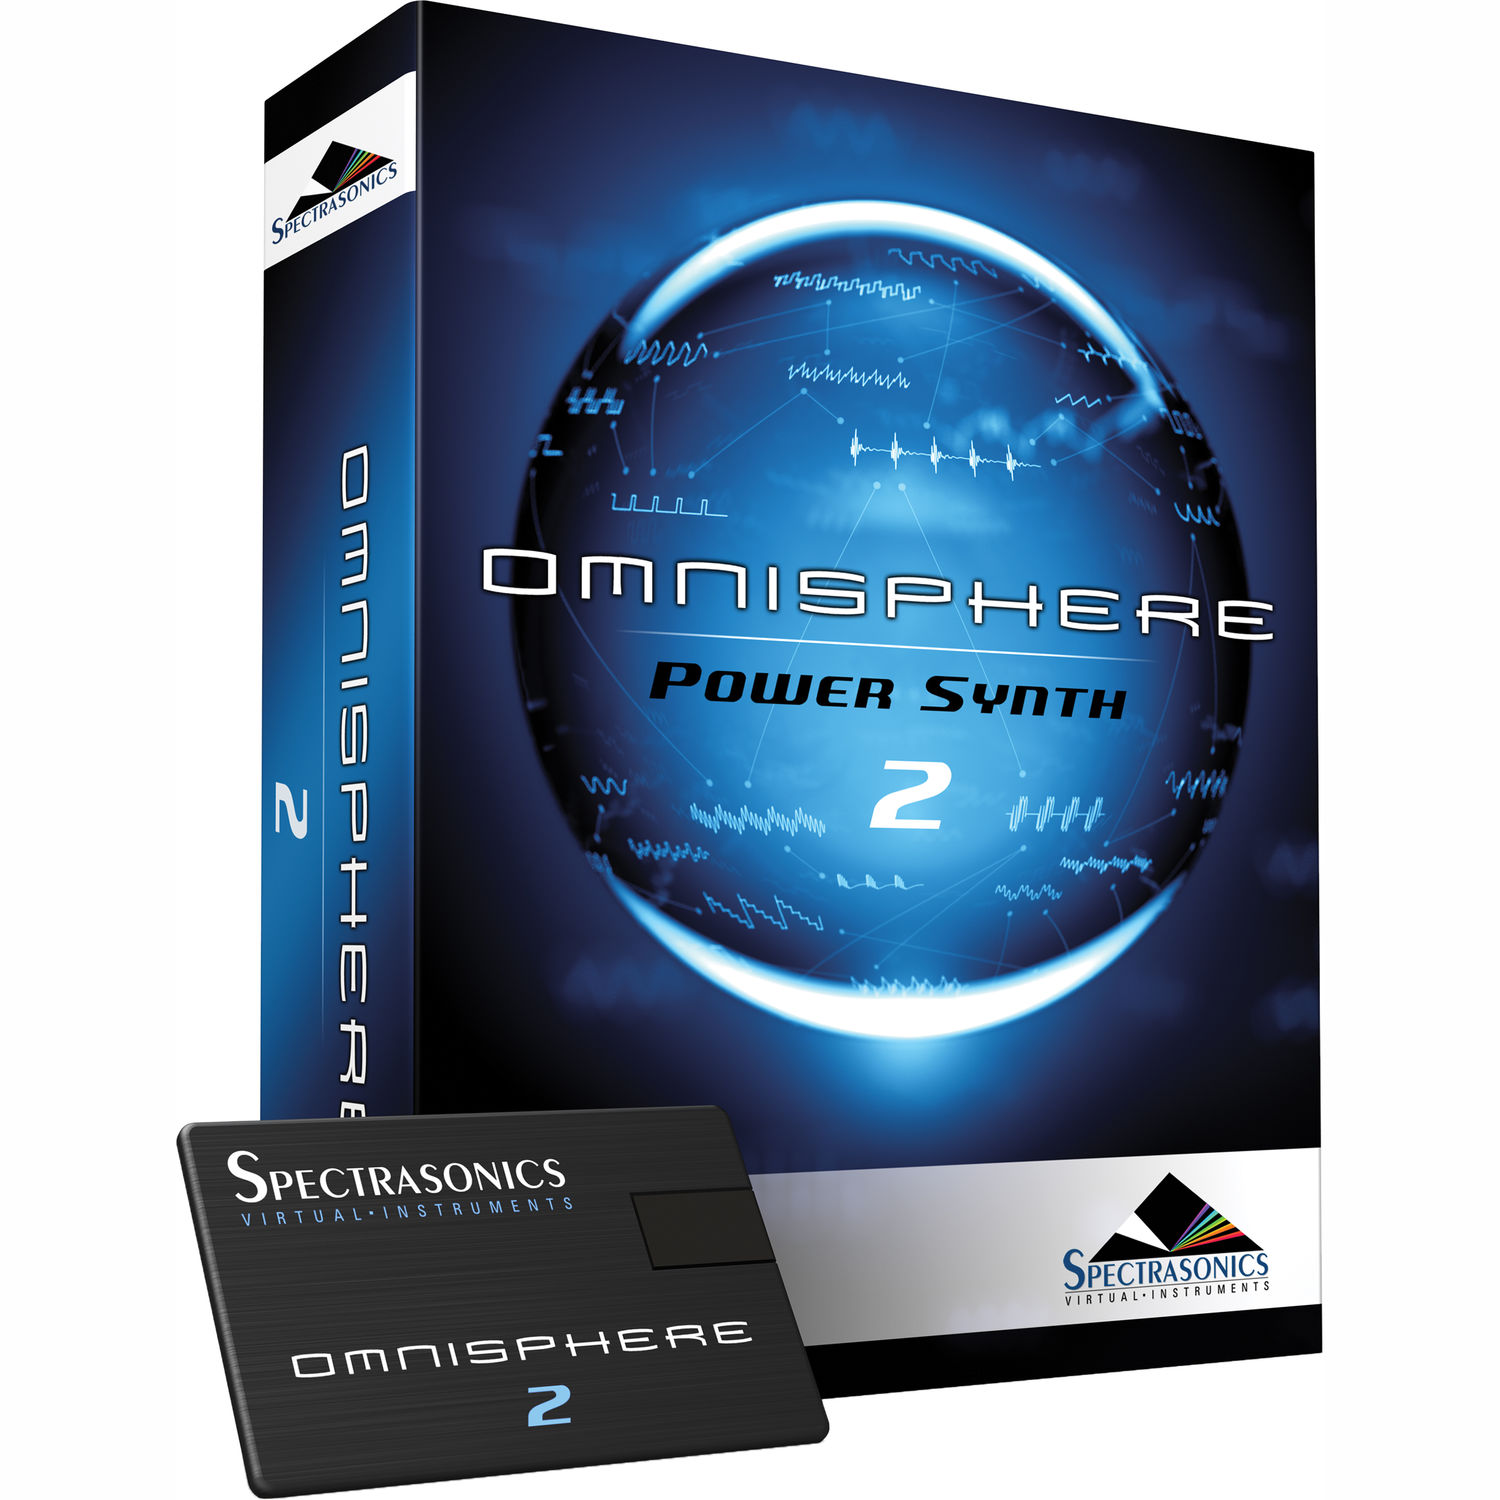 Omnisphere core library not found